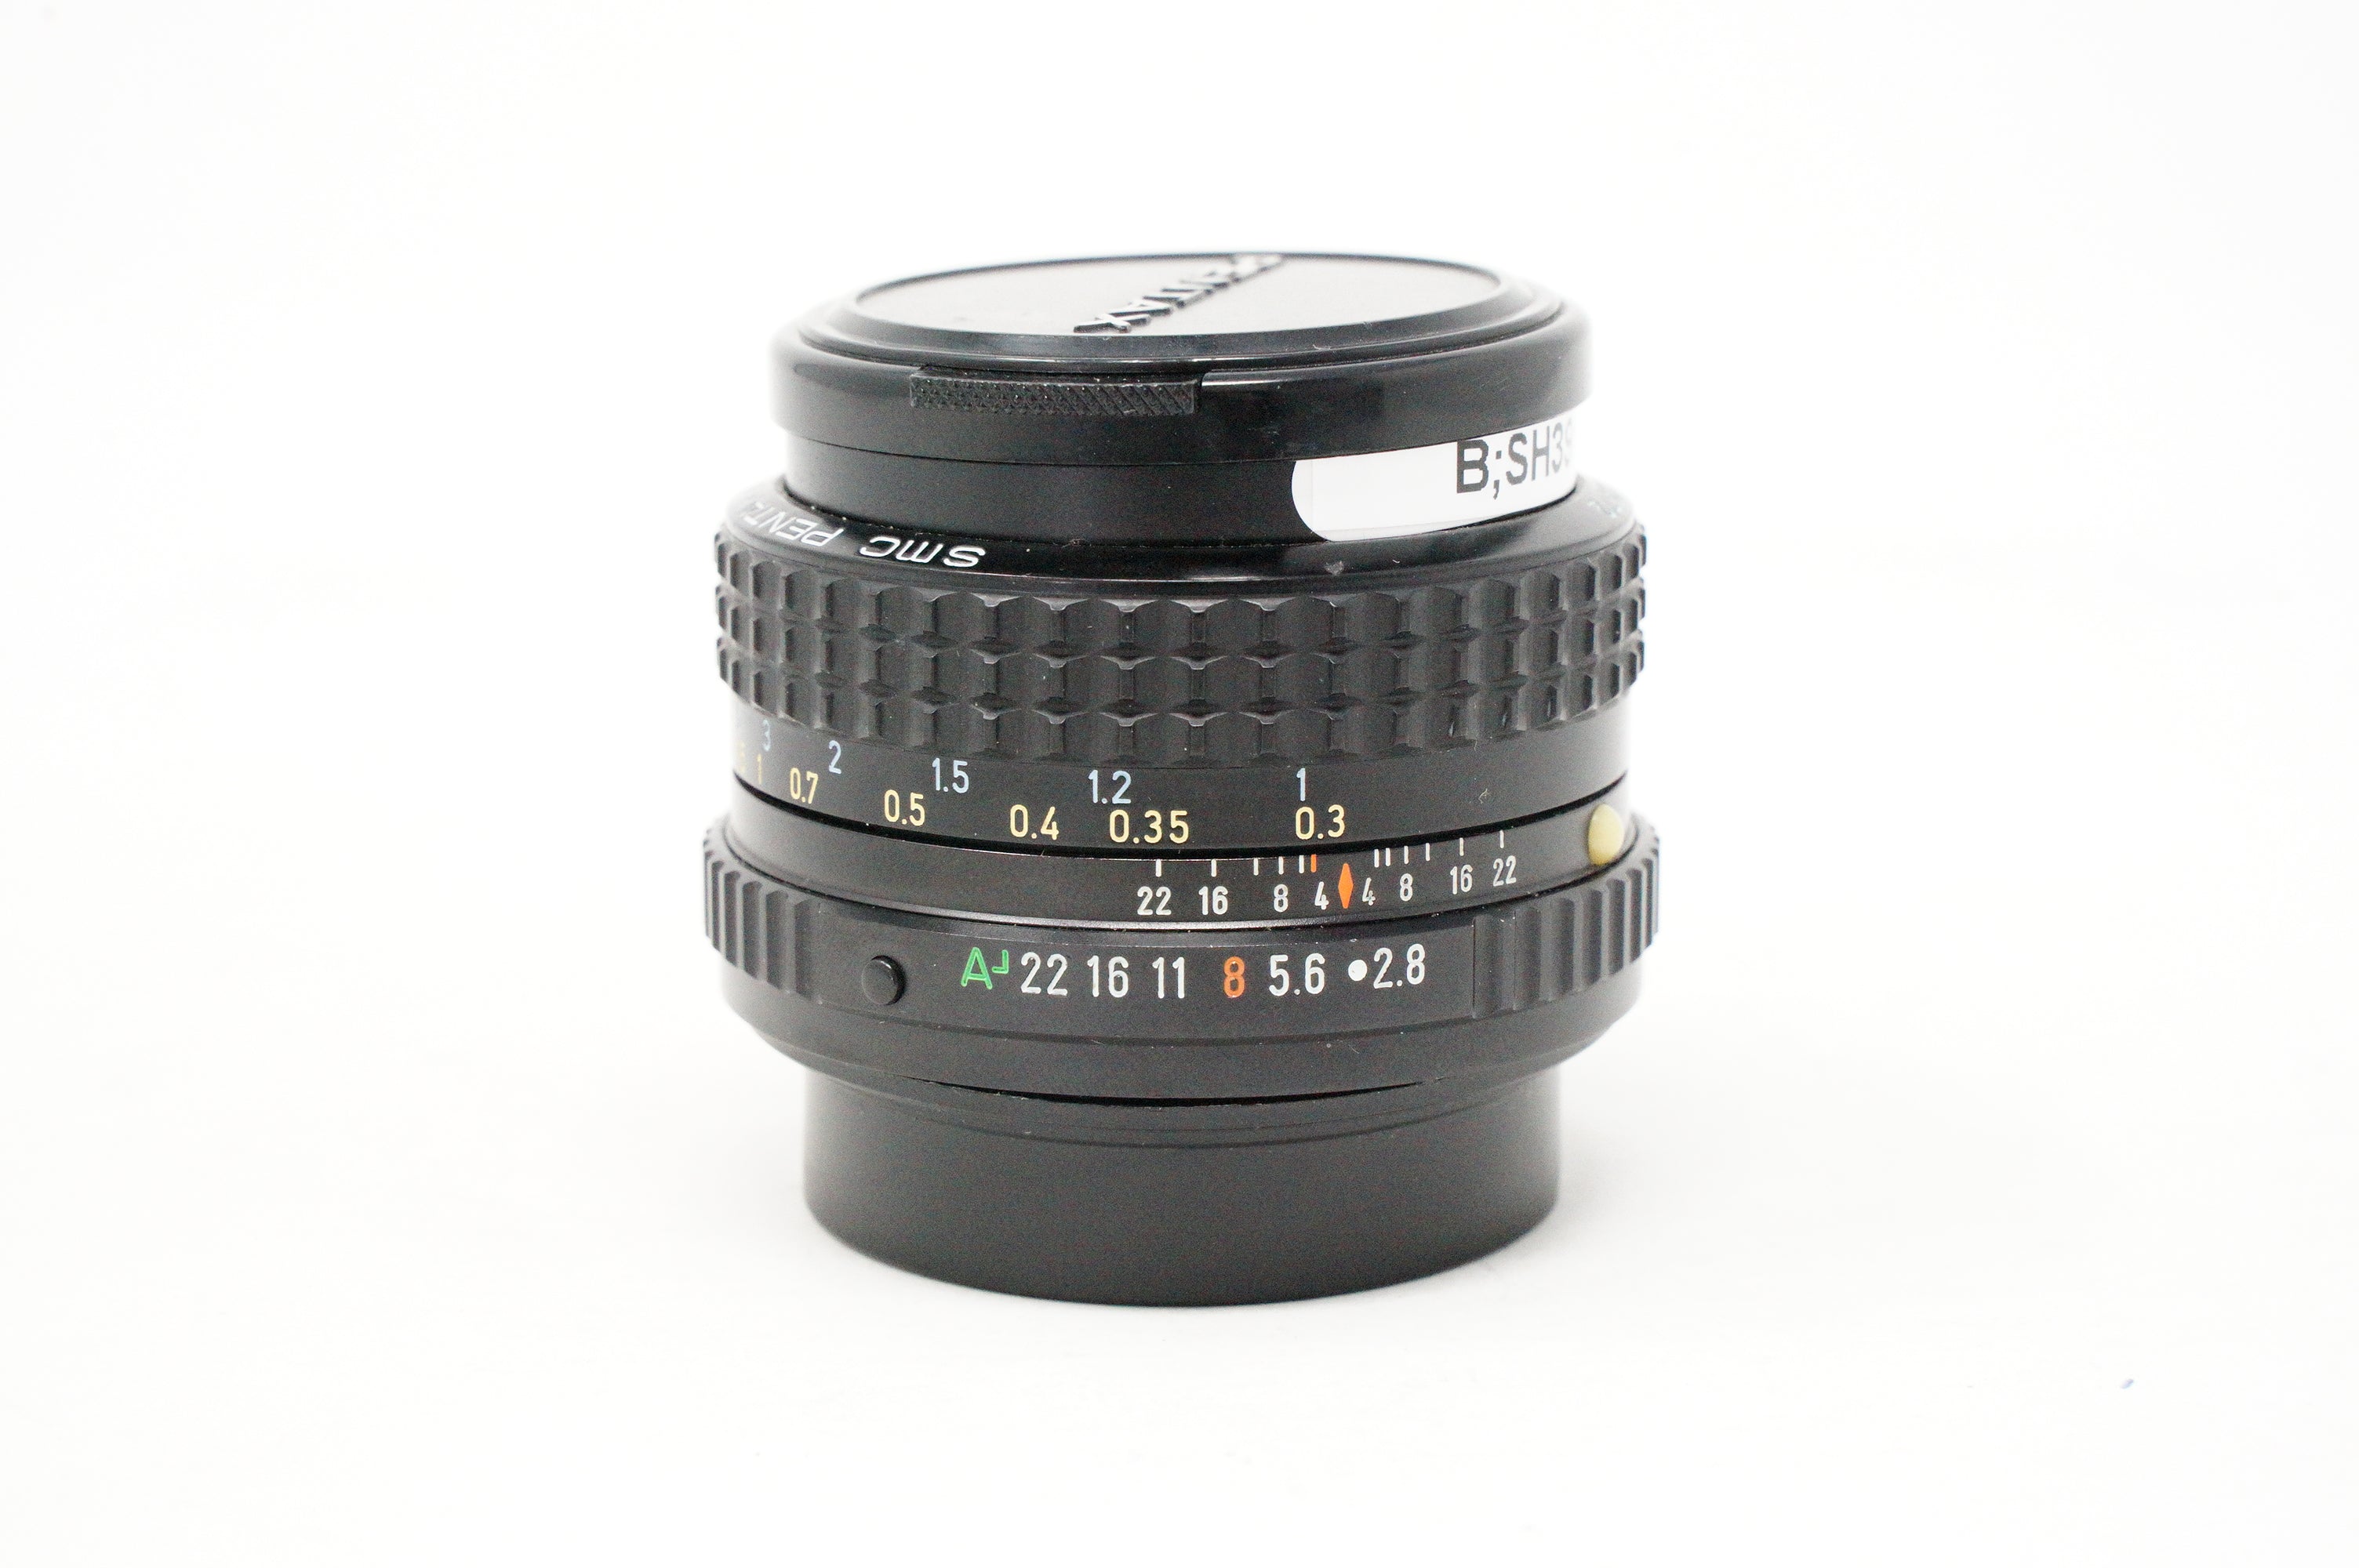 Product Image of Used Pentax-A SMC 28mm F2.8 PKA lens (Boxed SH39110)